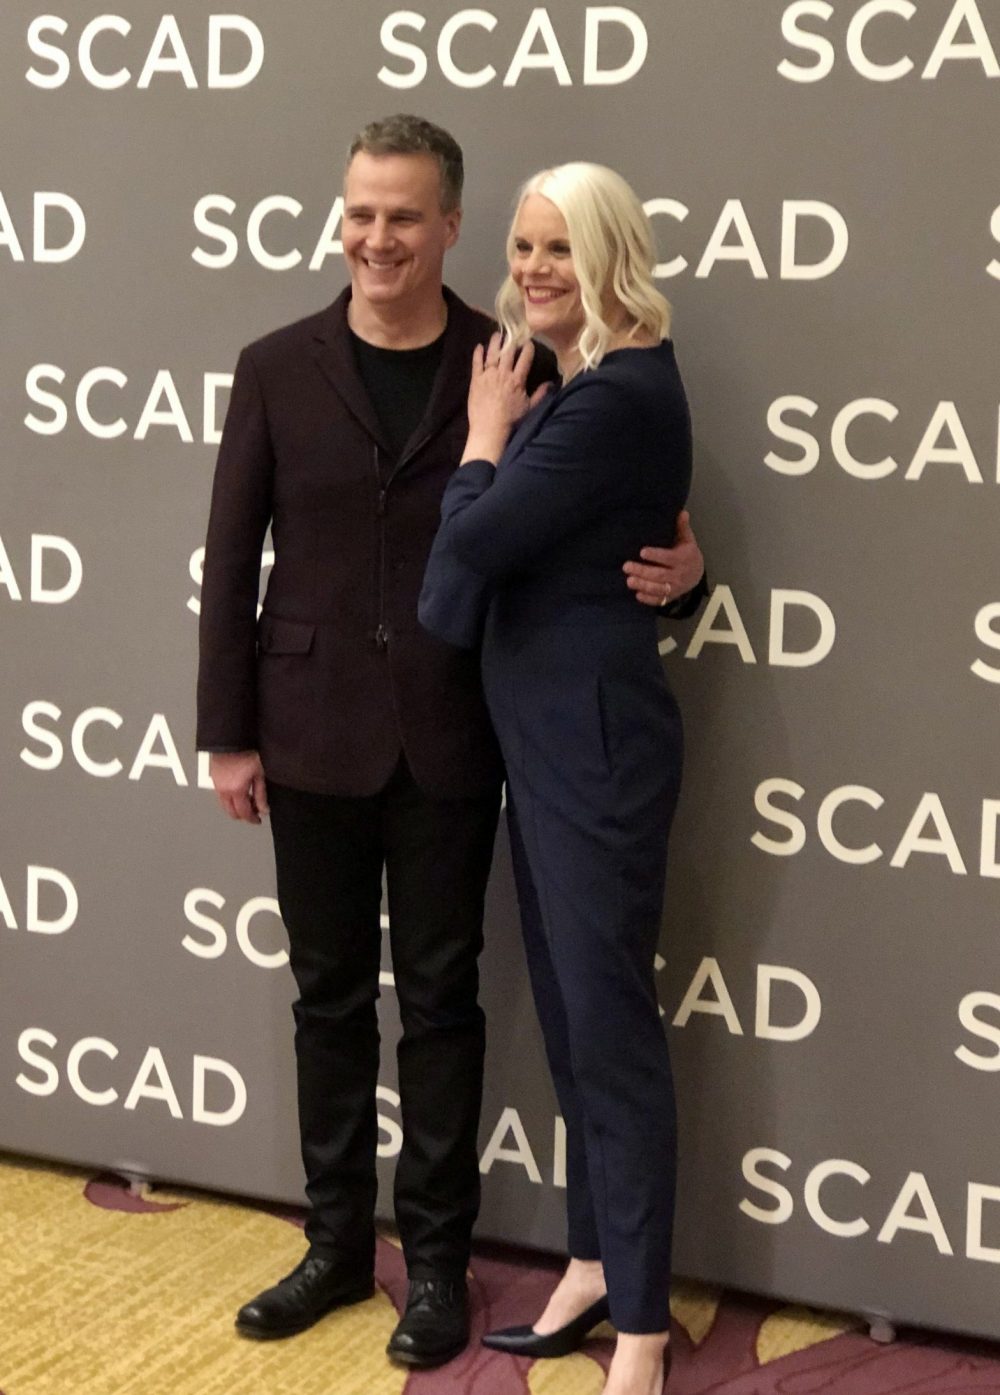 Council of Dads showrunners Tony Phelan and Joan Rater at SCAD aTVfest 2020 photo credit: Tracey Phillipps/So Many Shows